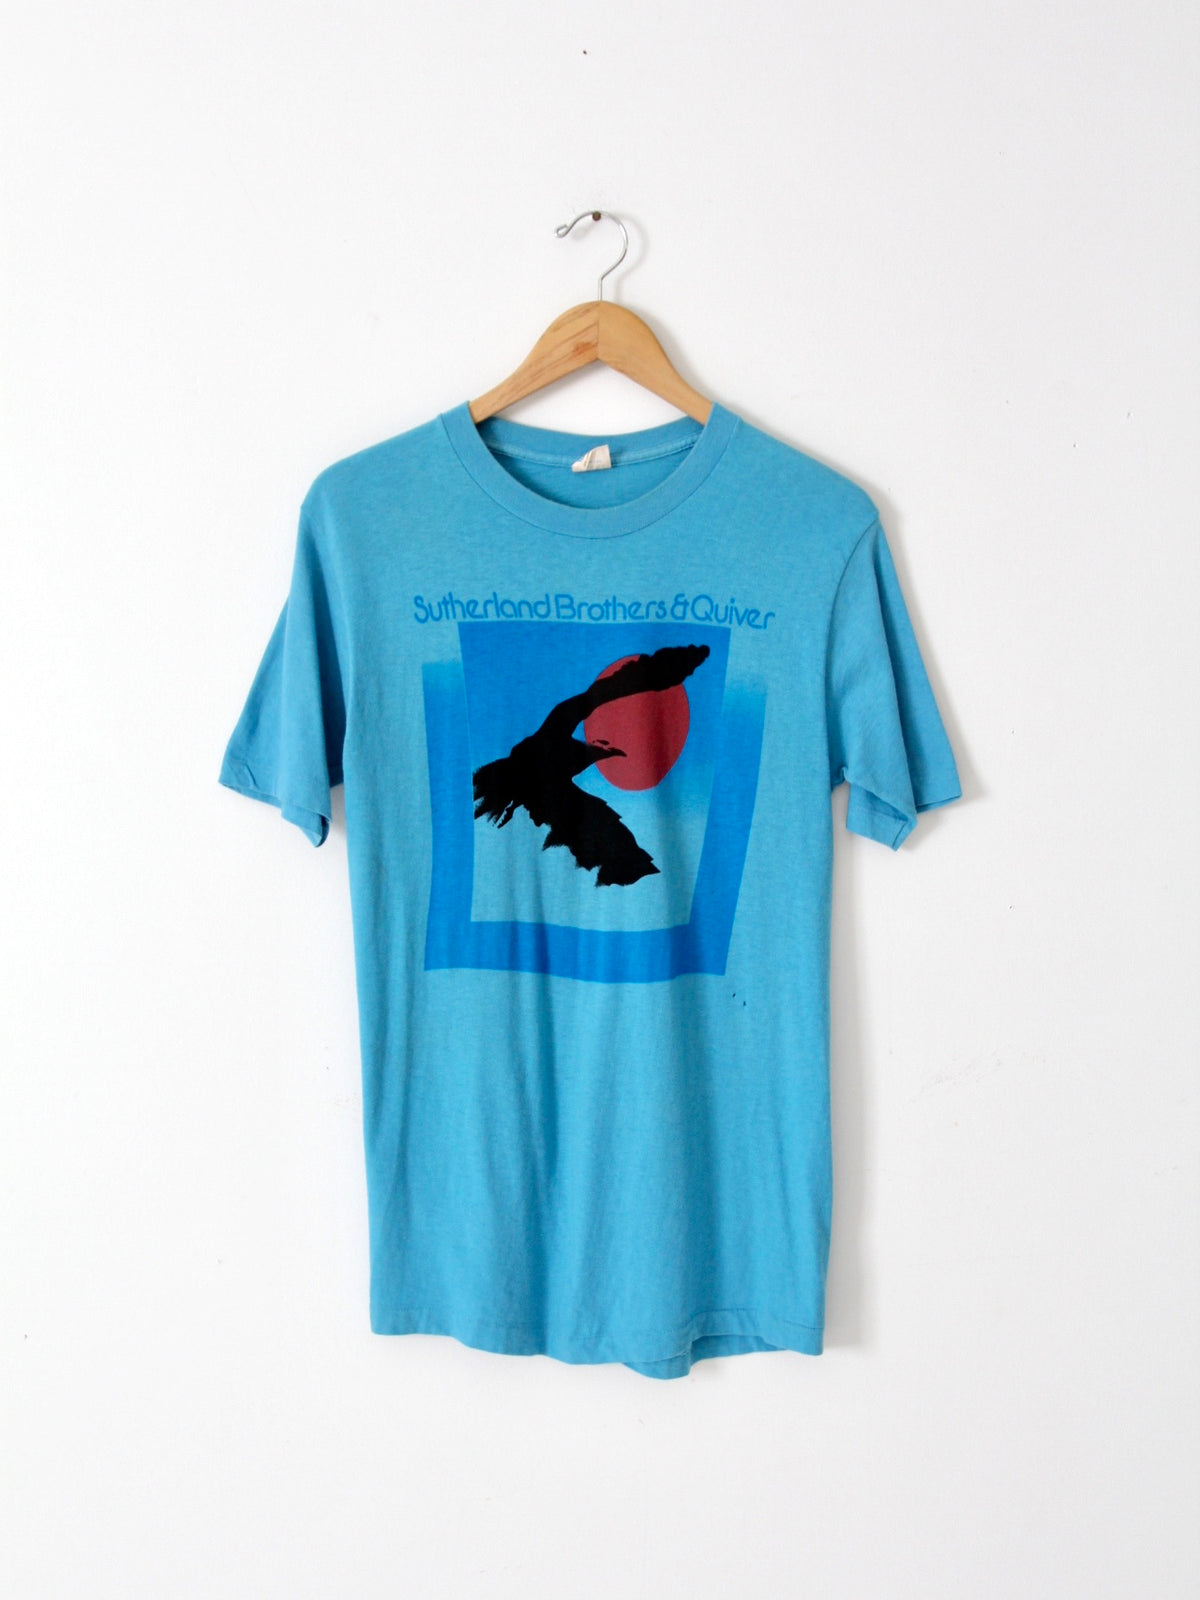 vintage Sutherland Brothers & Quiver t-shirt